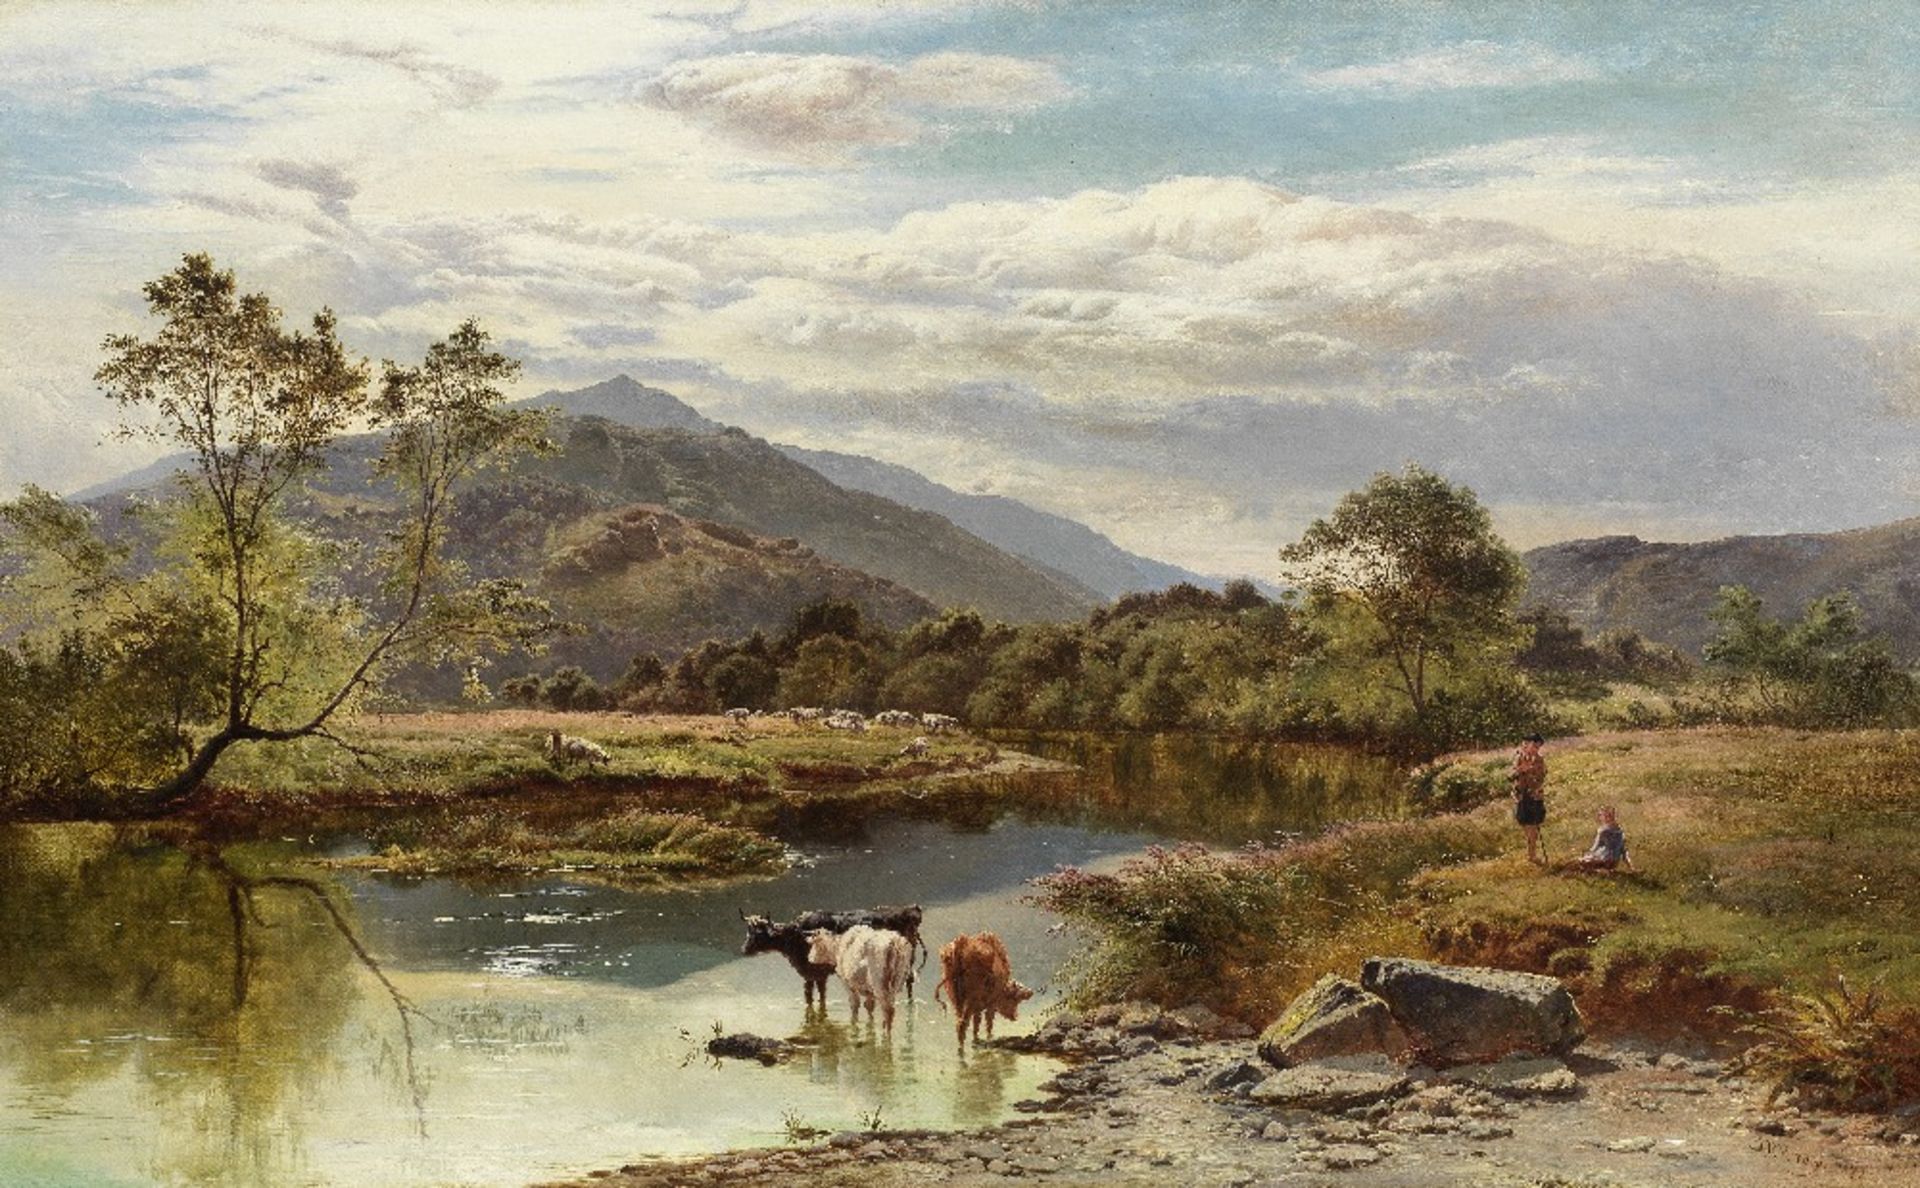 Sidney Richard Percy (British, 1821-1886) River landscape with cattle watering